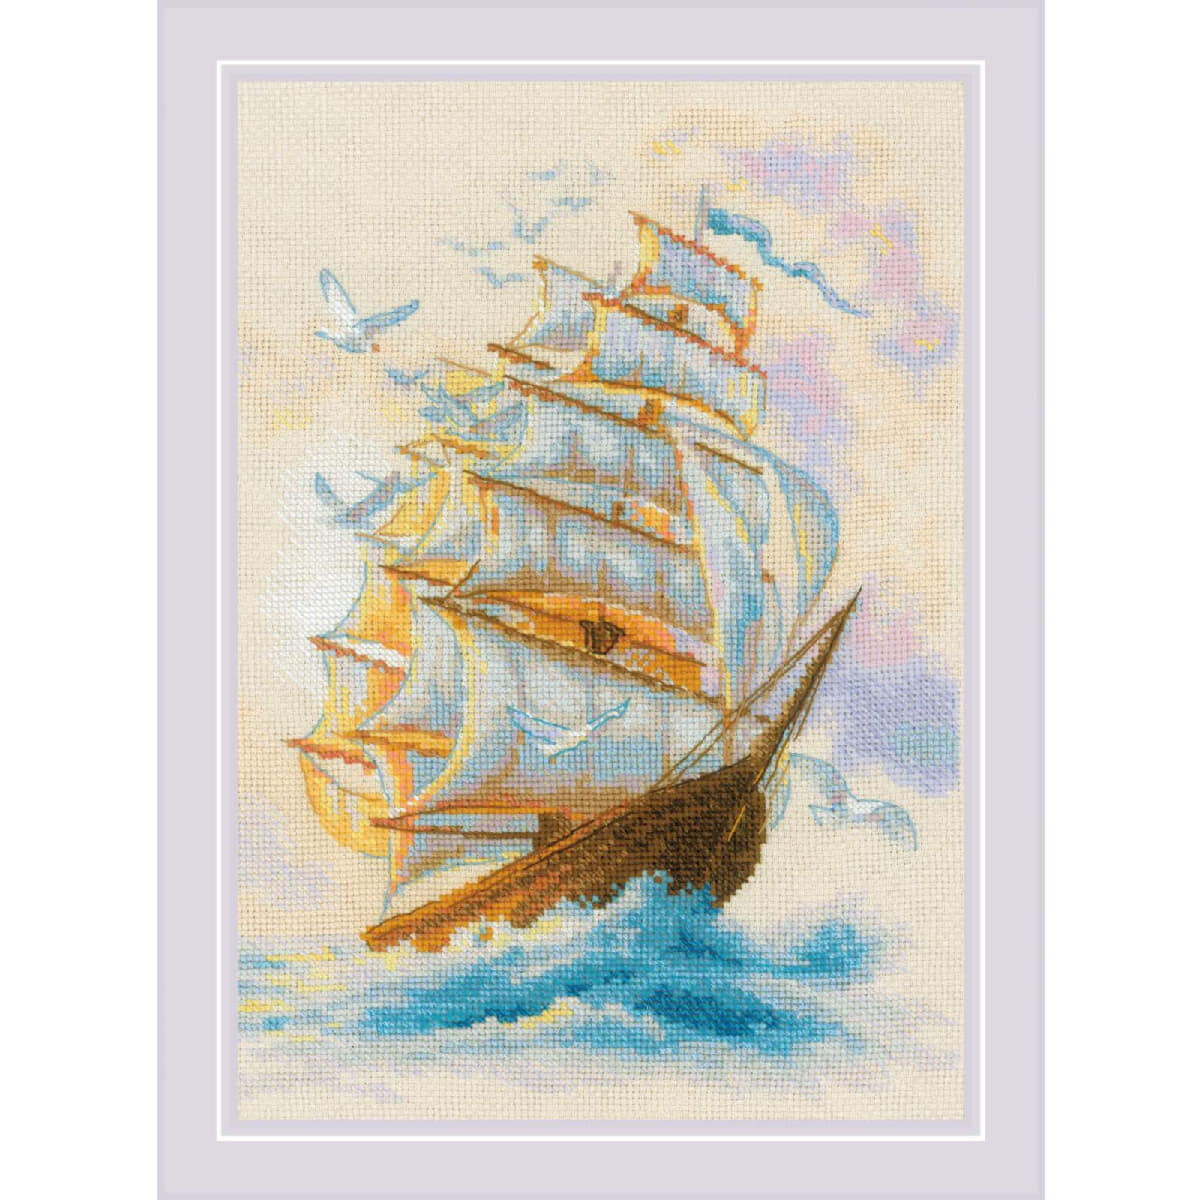 Riolis counted cross stitch kit "Wandering...